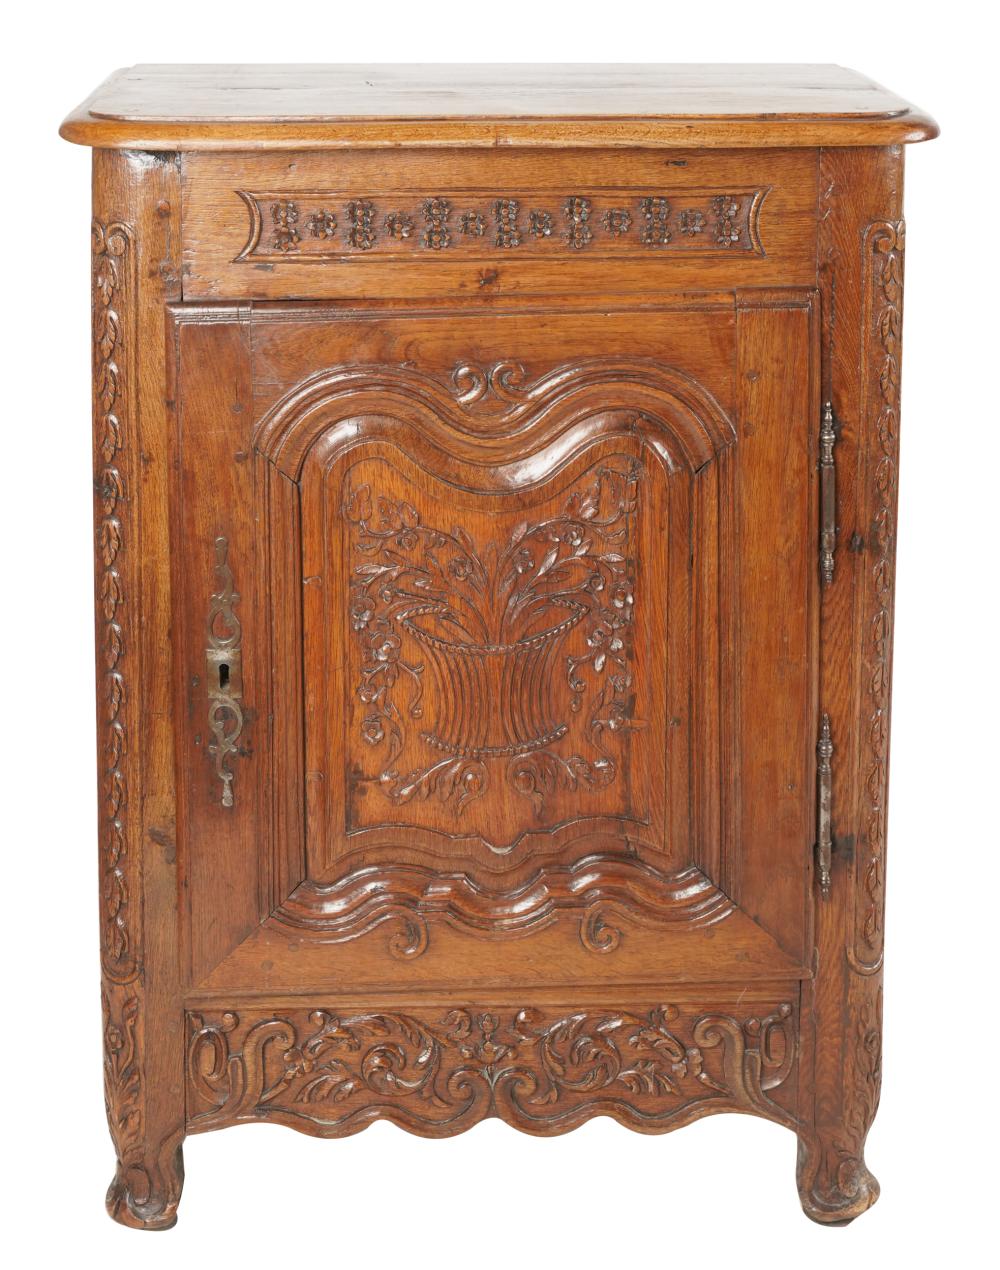 LOUIS XV PROVINCIAL STYLE CARVED 331a31